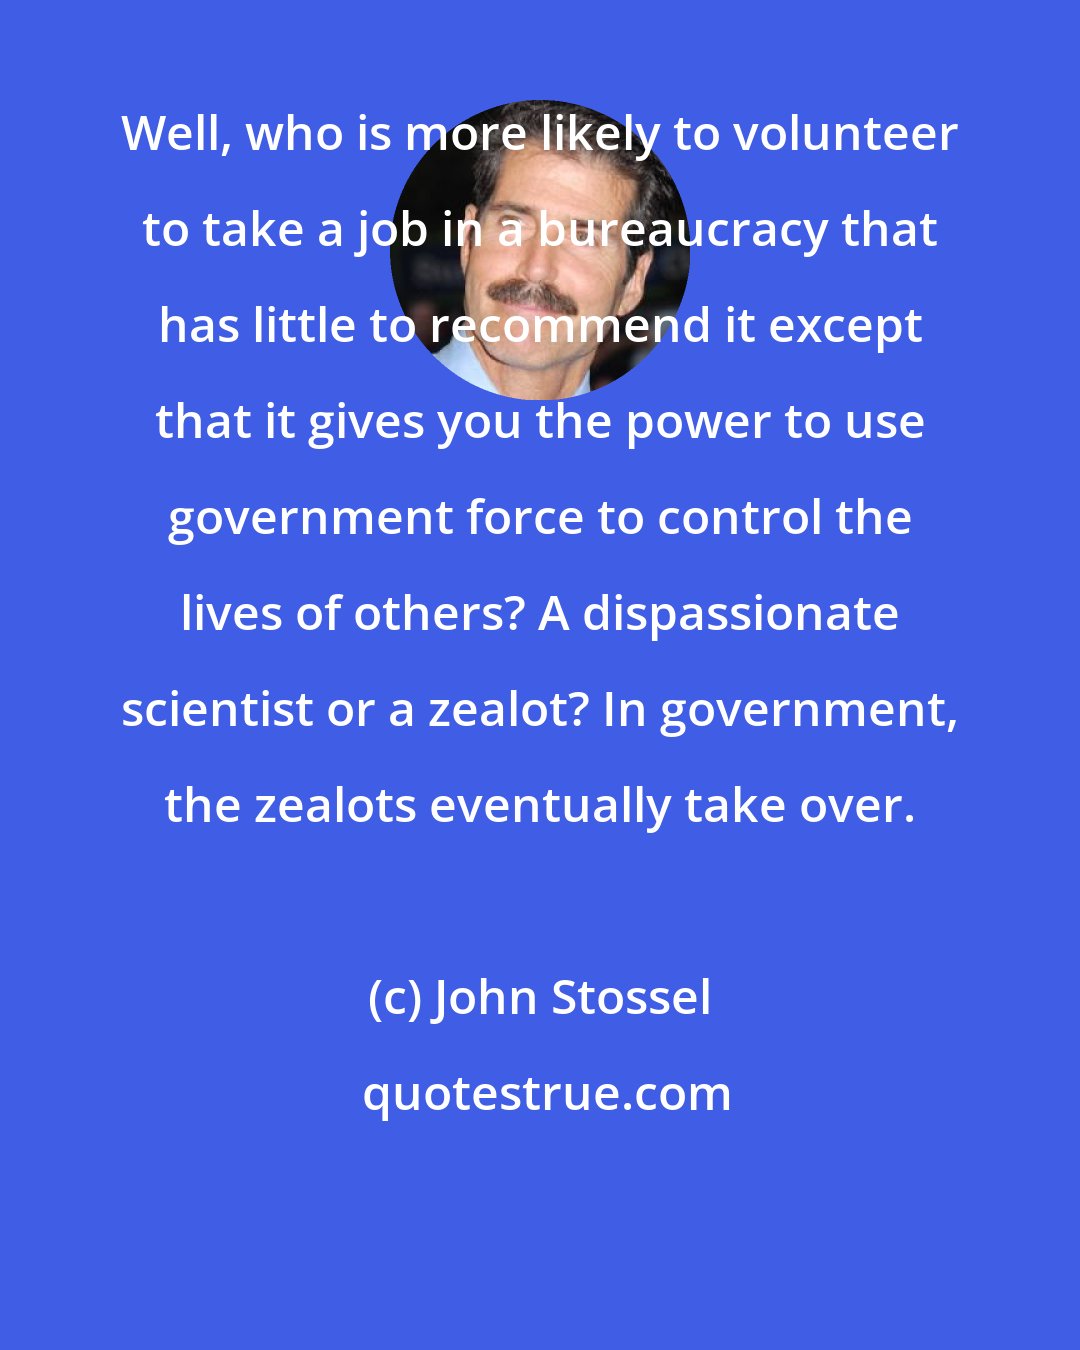 John Stossel: Well, who is more likely to volunteer to take a job in a bureaucracy that has little to recommend it except that it gives you the power to use government force to control the lives of others? A dispassionate scientist or a zealot? In government, the zealots eventually take over.